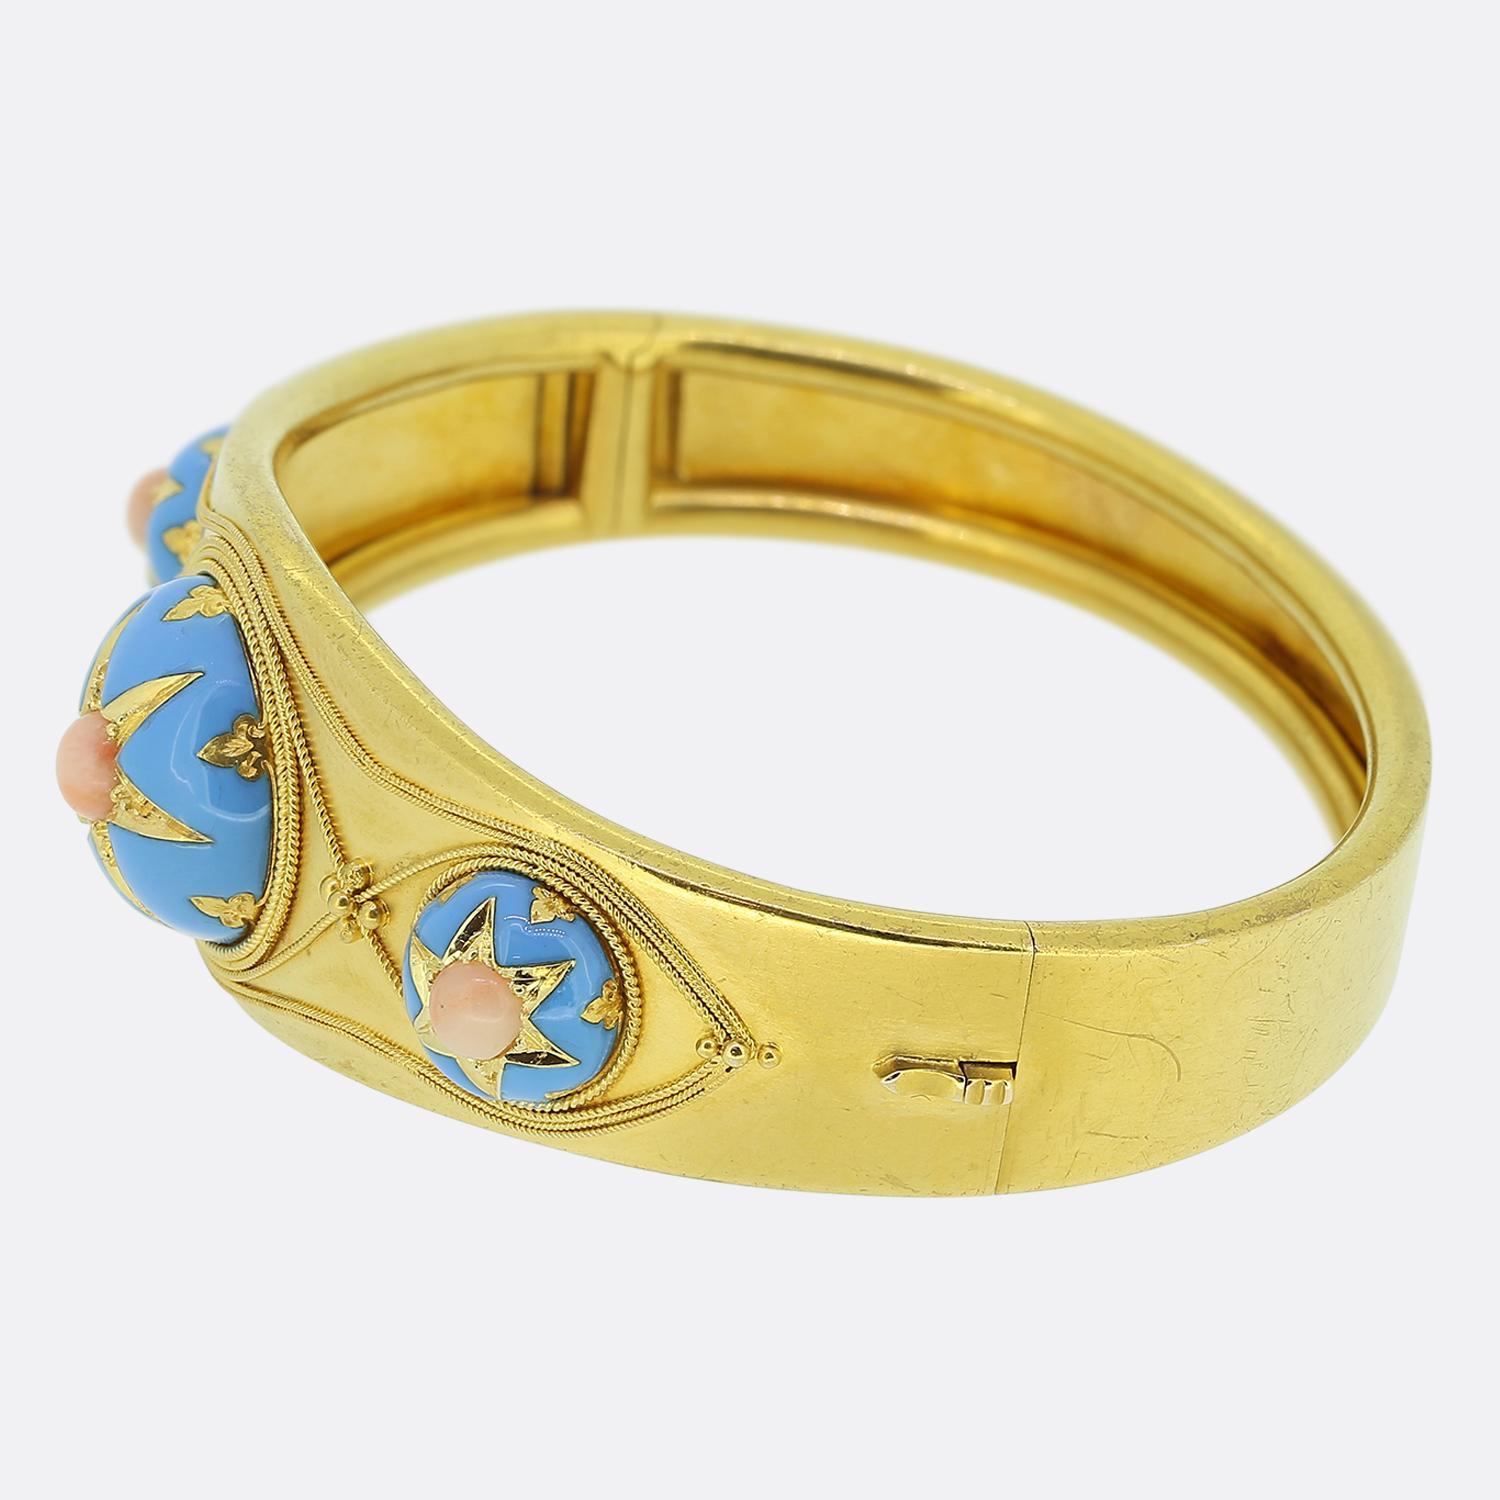 Here we have a truly wonderful gold bracelet that dates back to the Victorian era. This 15ct yellow gold bracelet is crafted in an etruscan style and features three coral that are surrounded by blue enamel that is in perfect condition. The blue